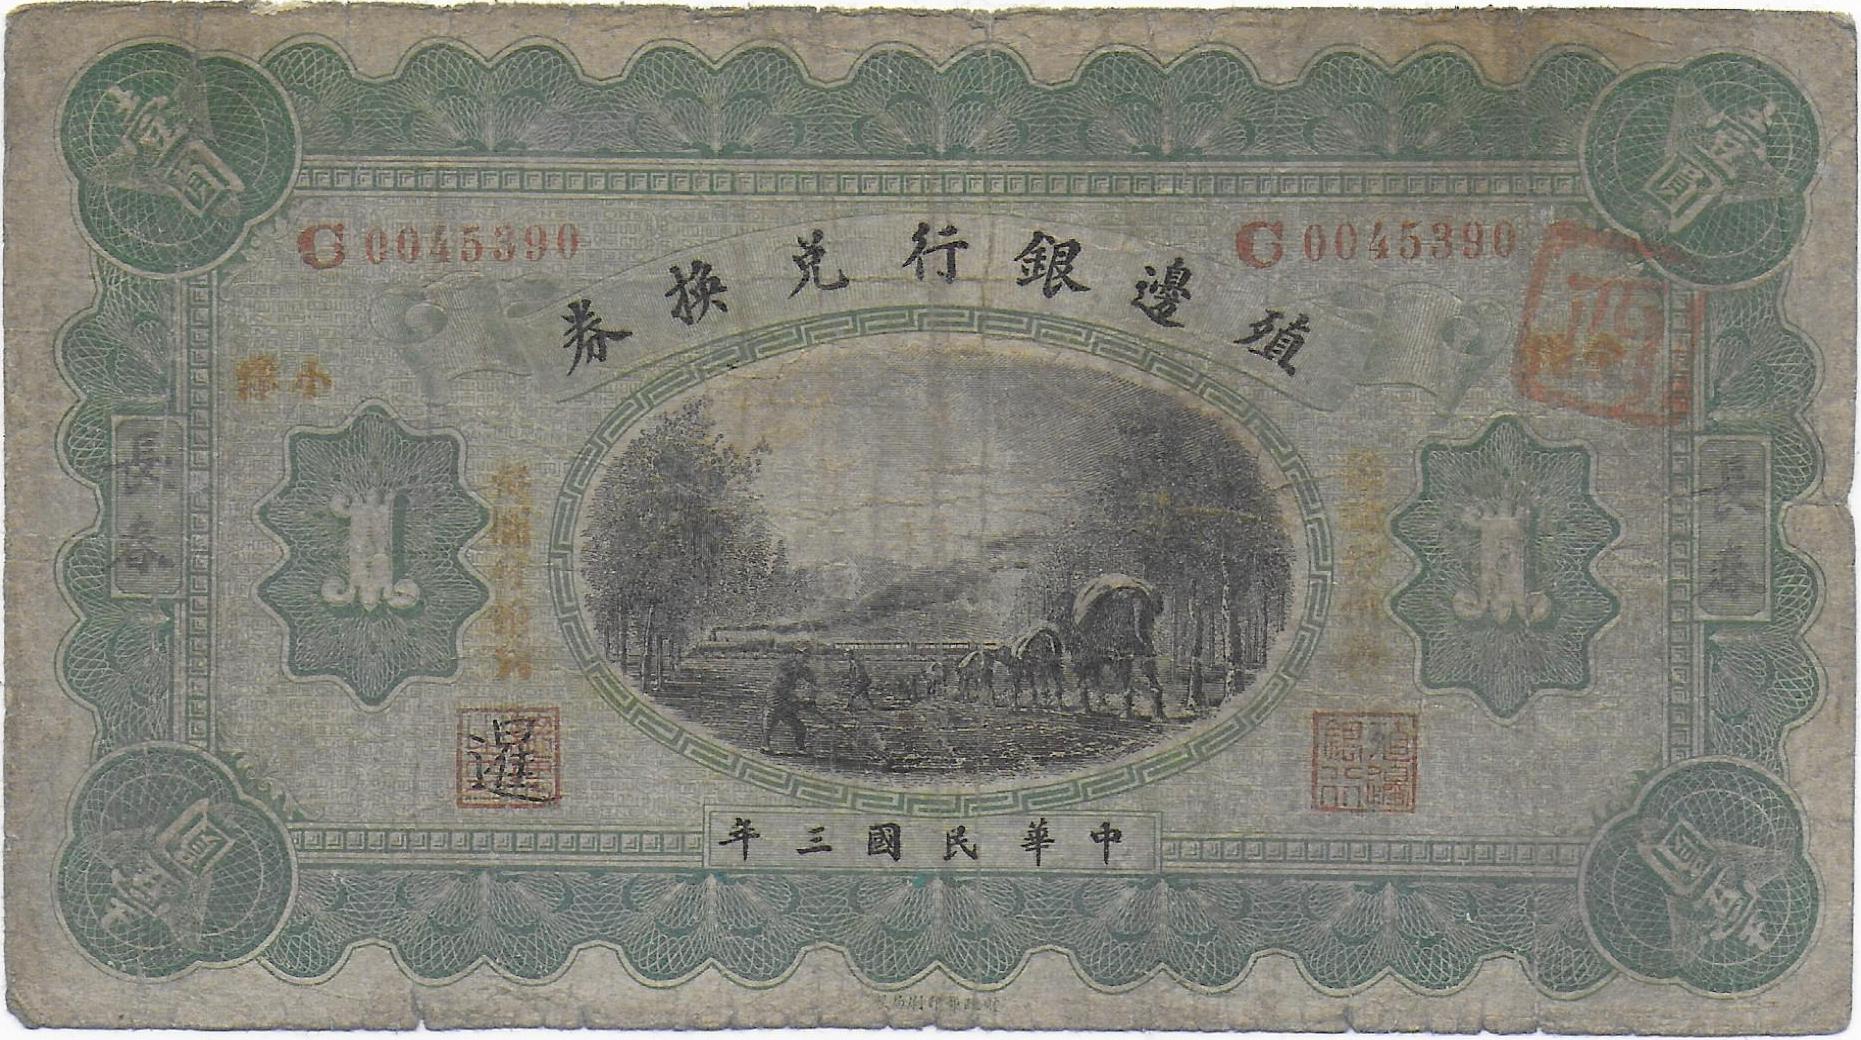 China Bank Of Territorial Development One Dollar front.jpg